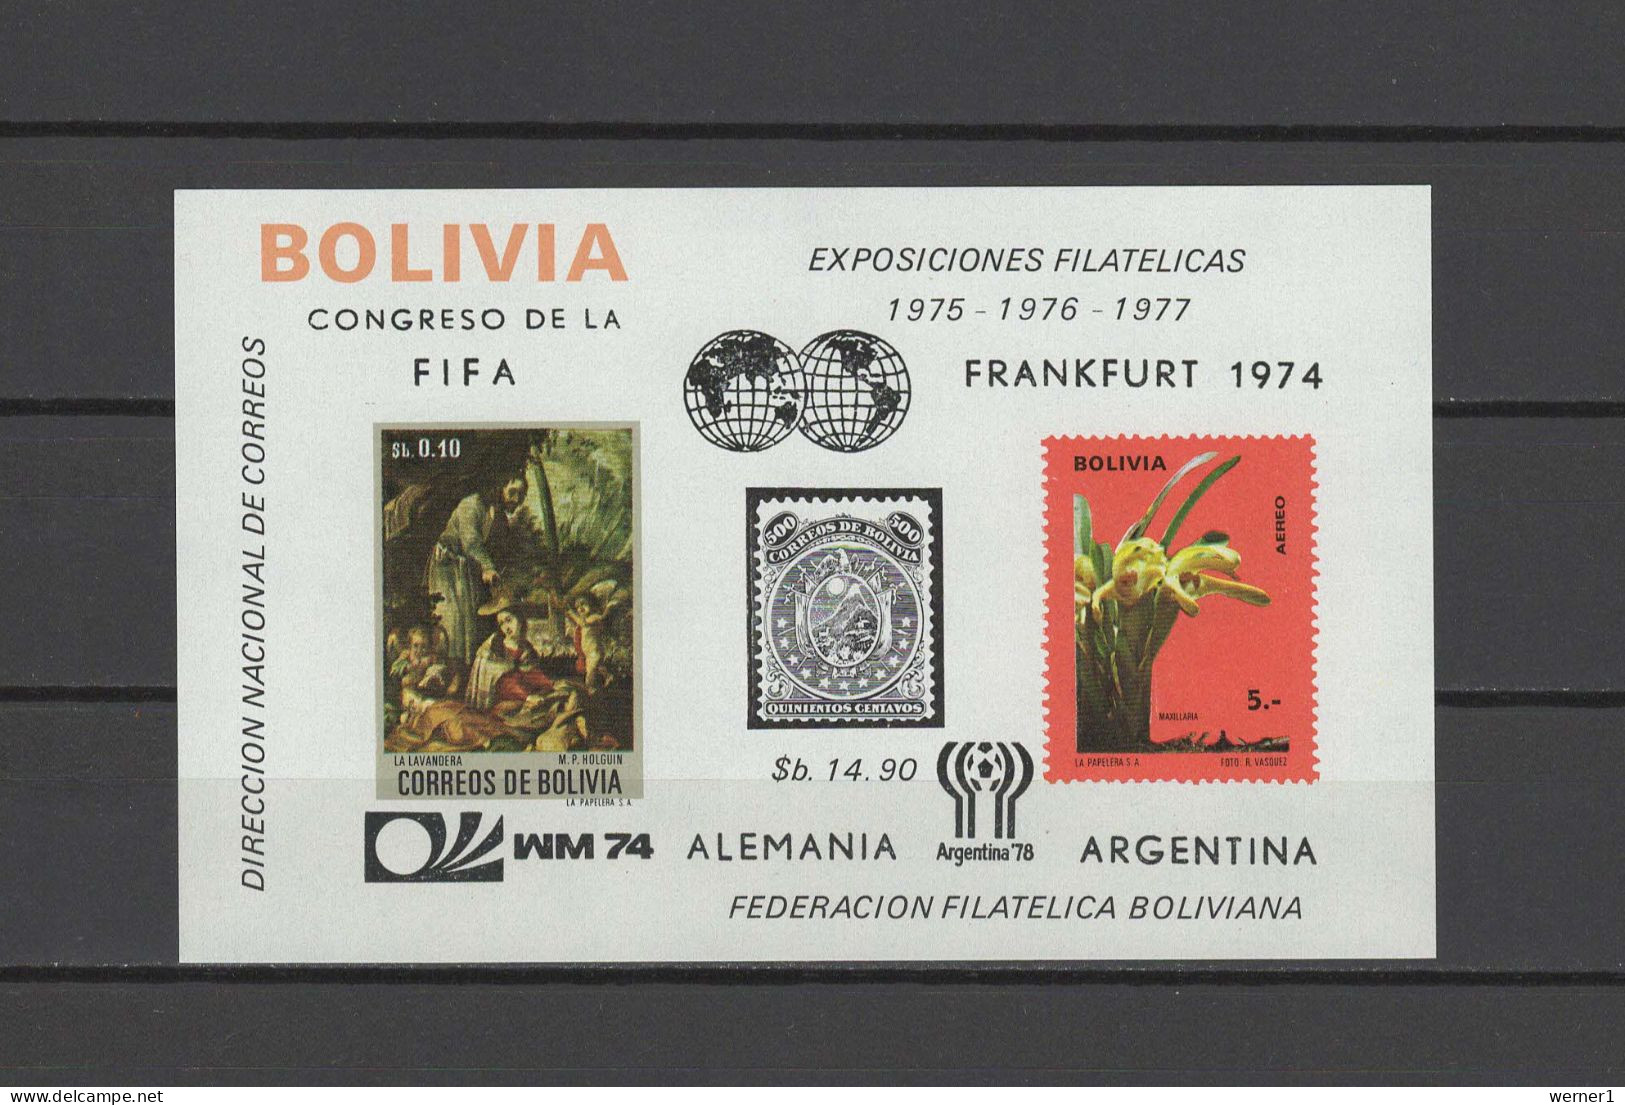 Bolivia 1974 Football Soccer World Cup, Paintings, Orchids S/s MNH -scarce- - 1974 – West Germany